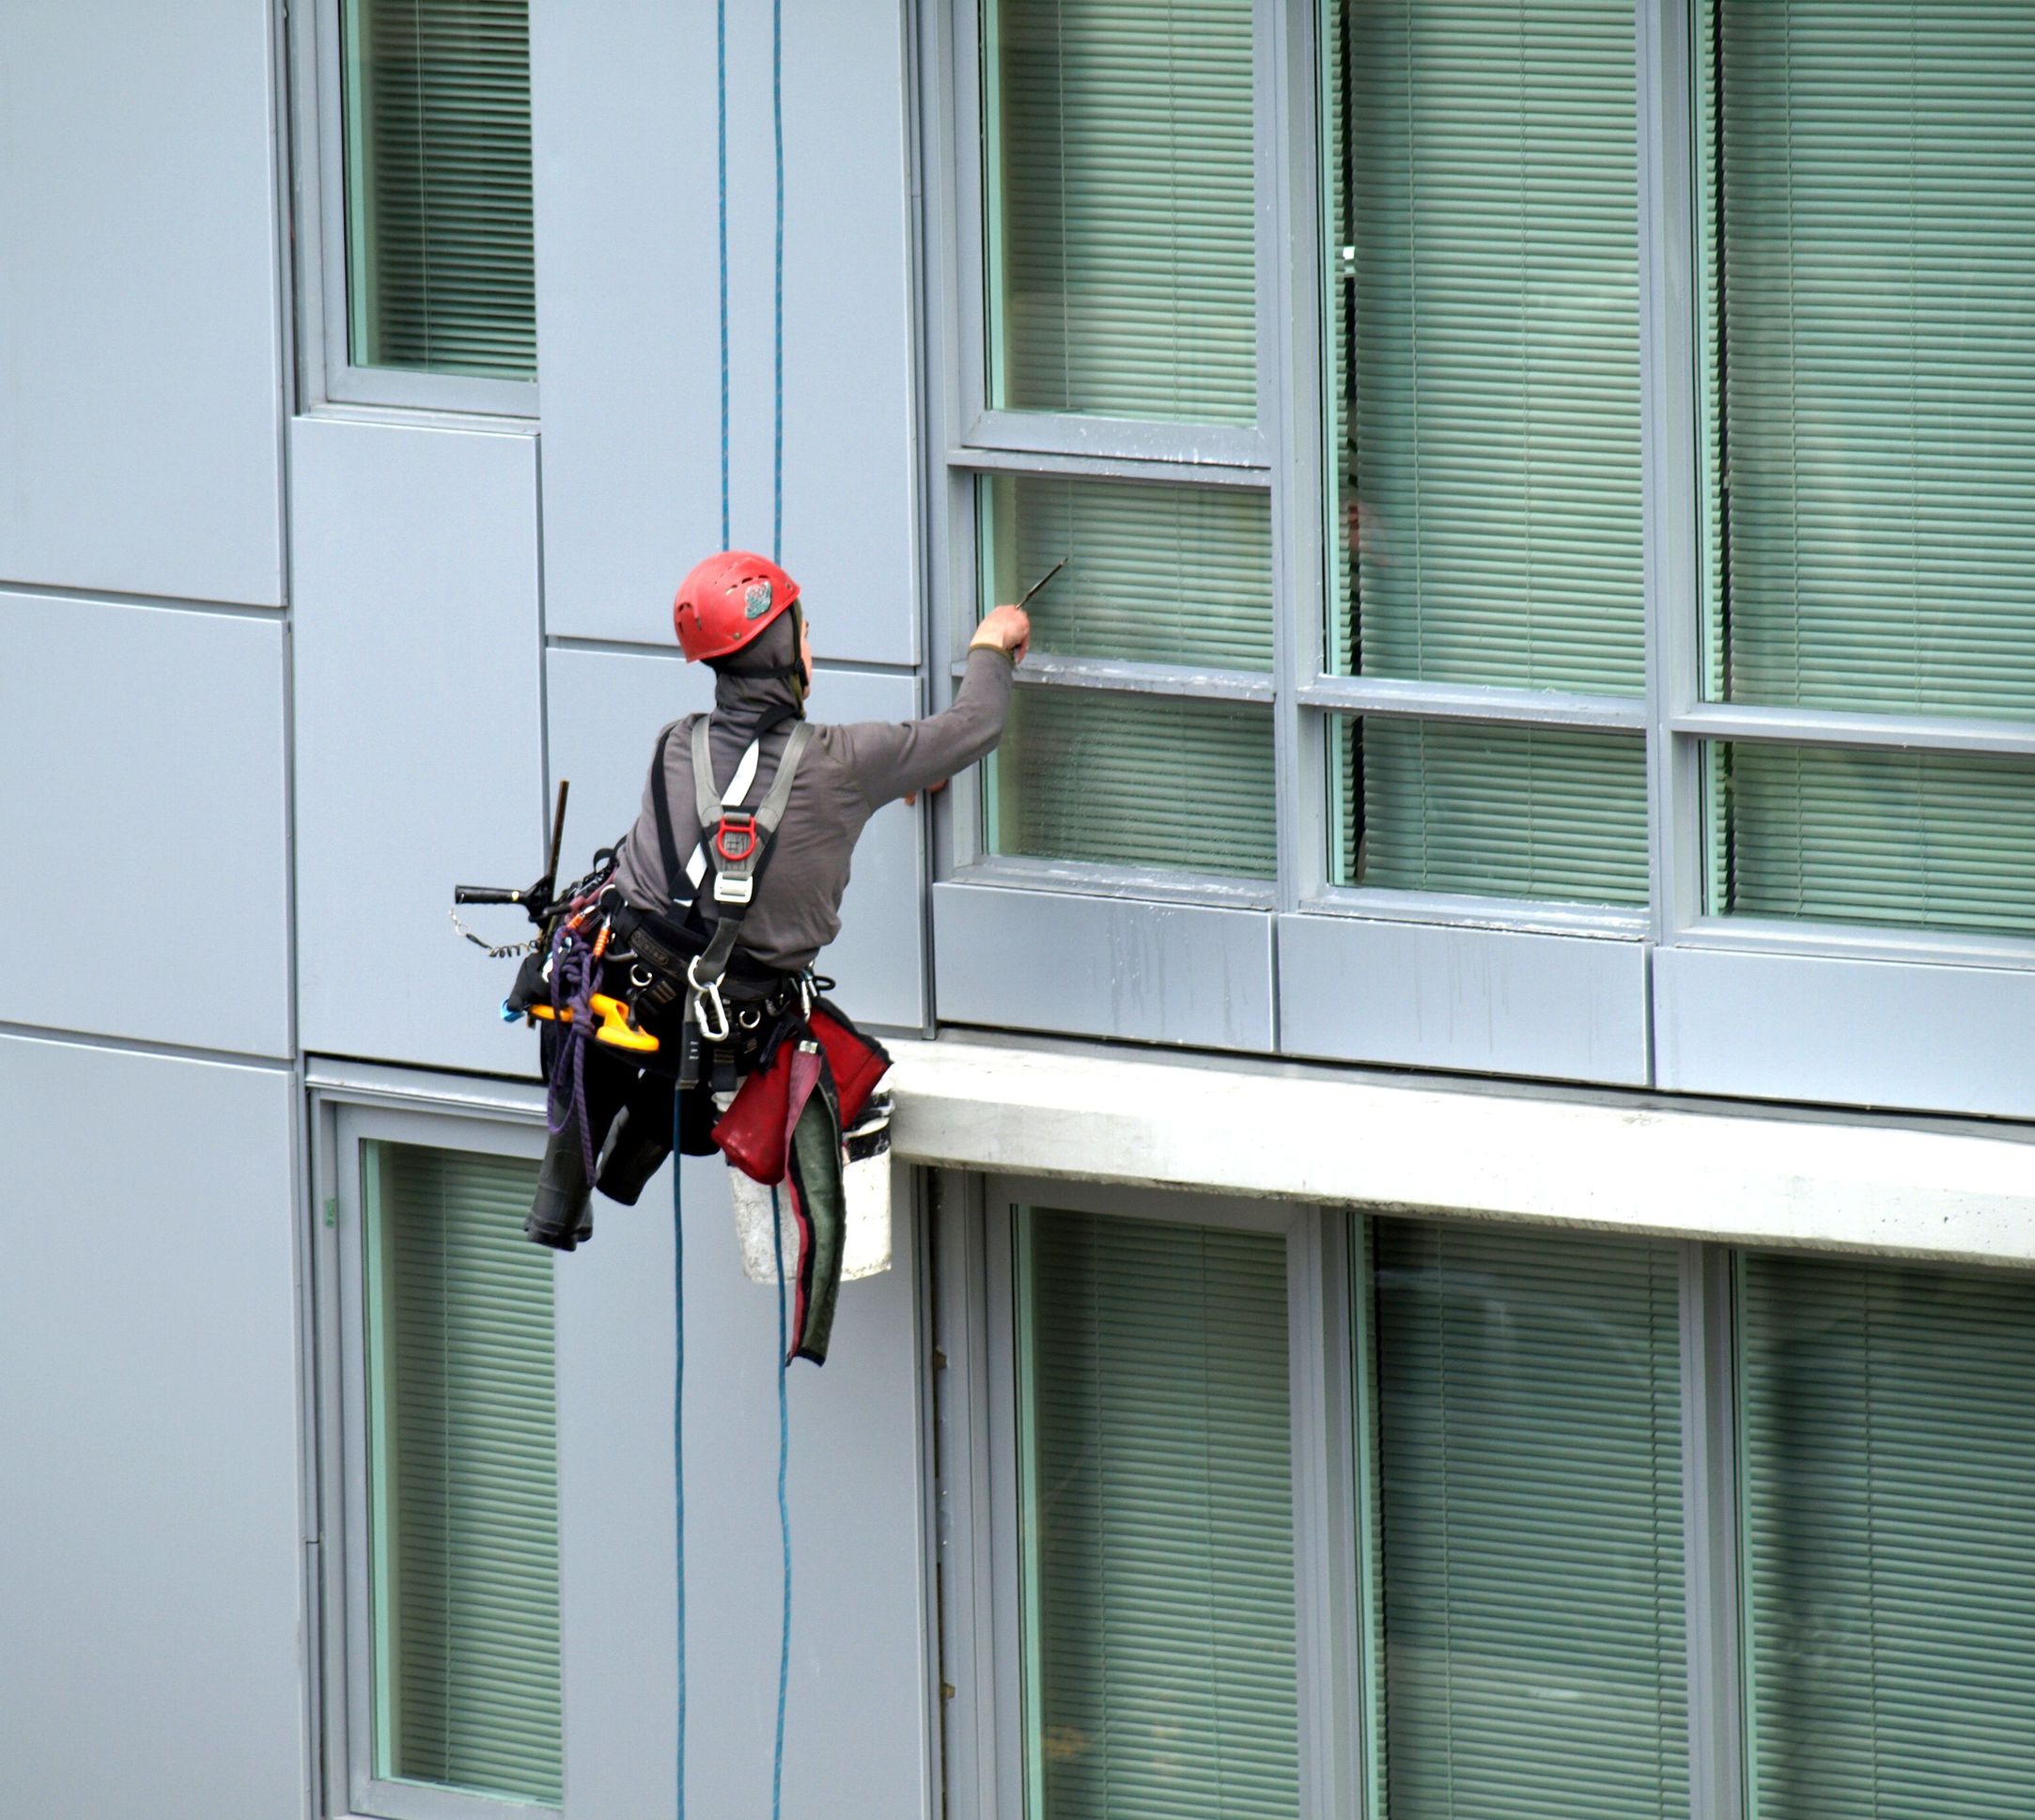 Choose a Professional Building Cleaning Company in Mansfield, OH Instead of Doing It Yourself